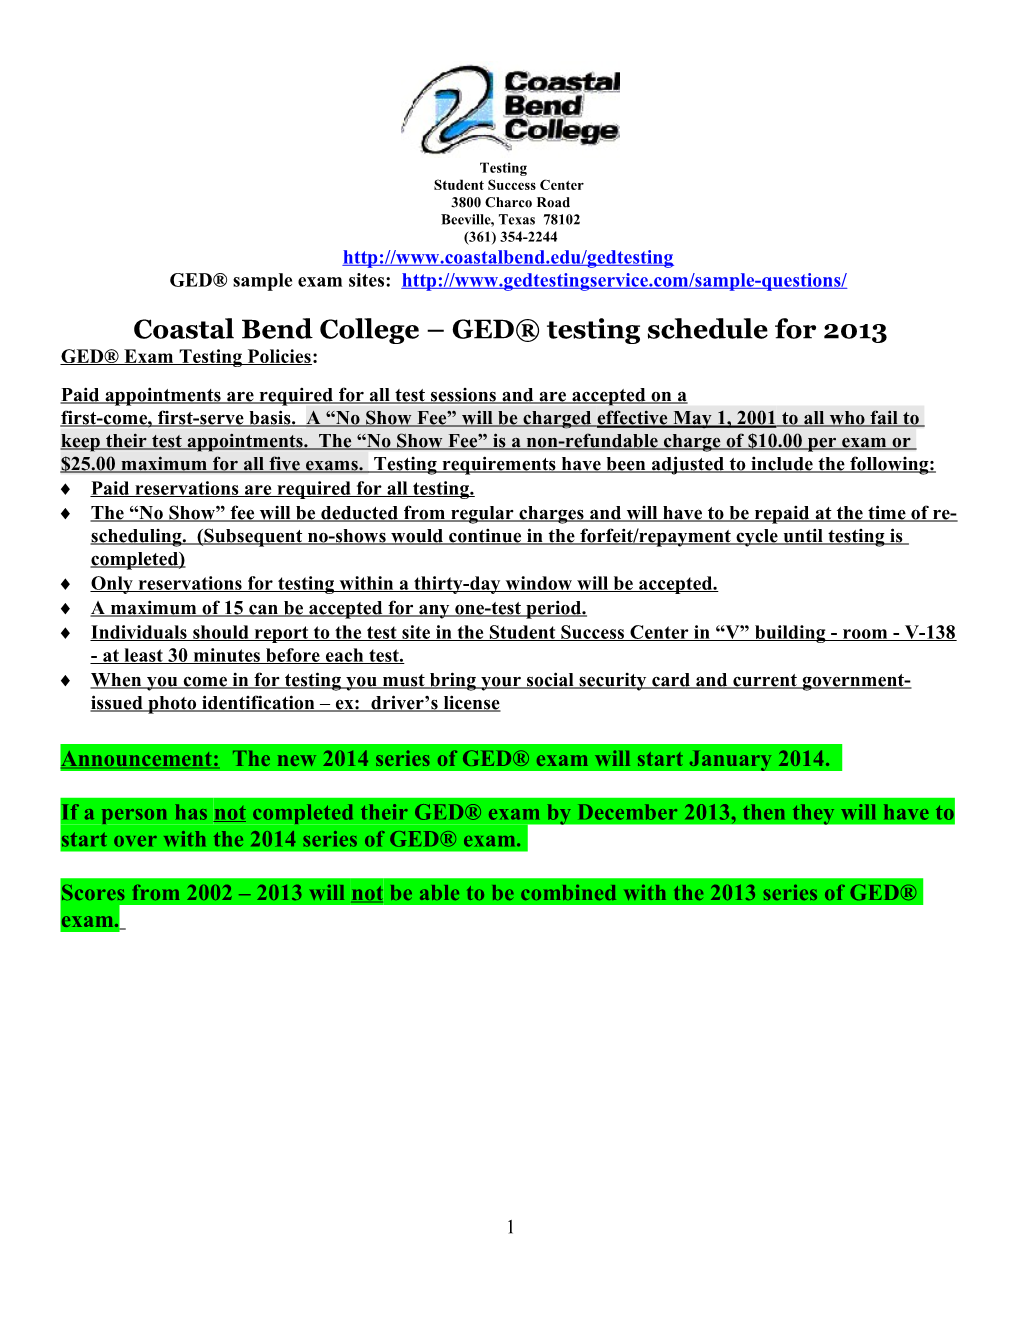 Coastal Bend College GED Testing Schedule for 2013